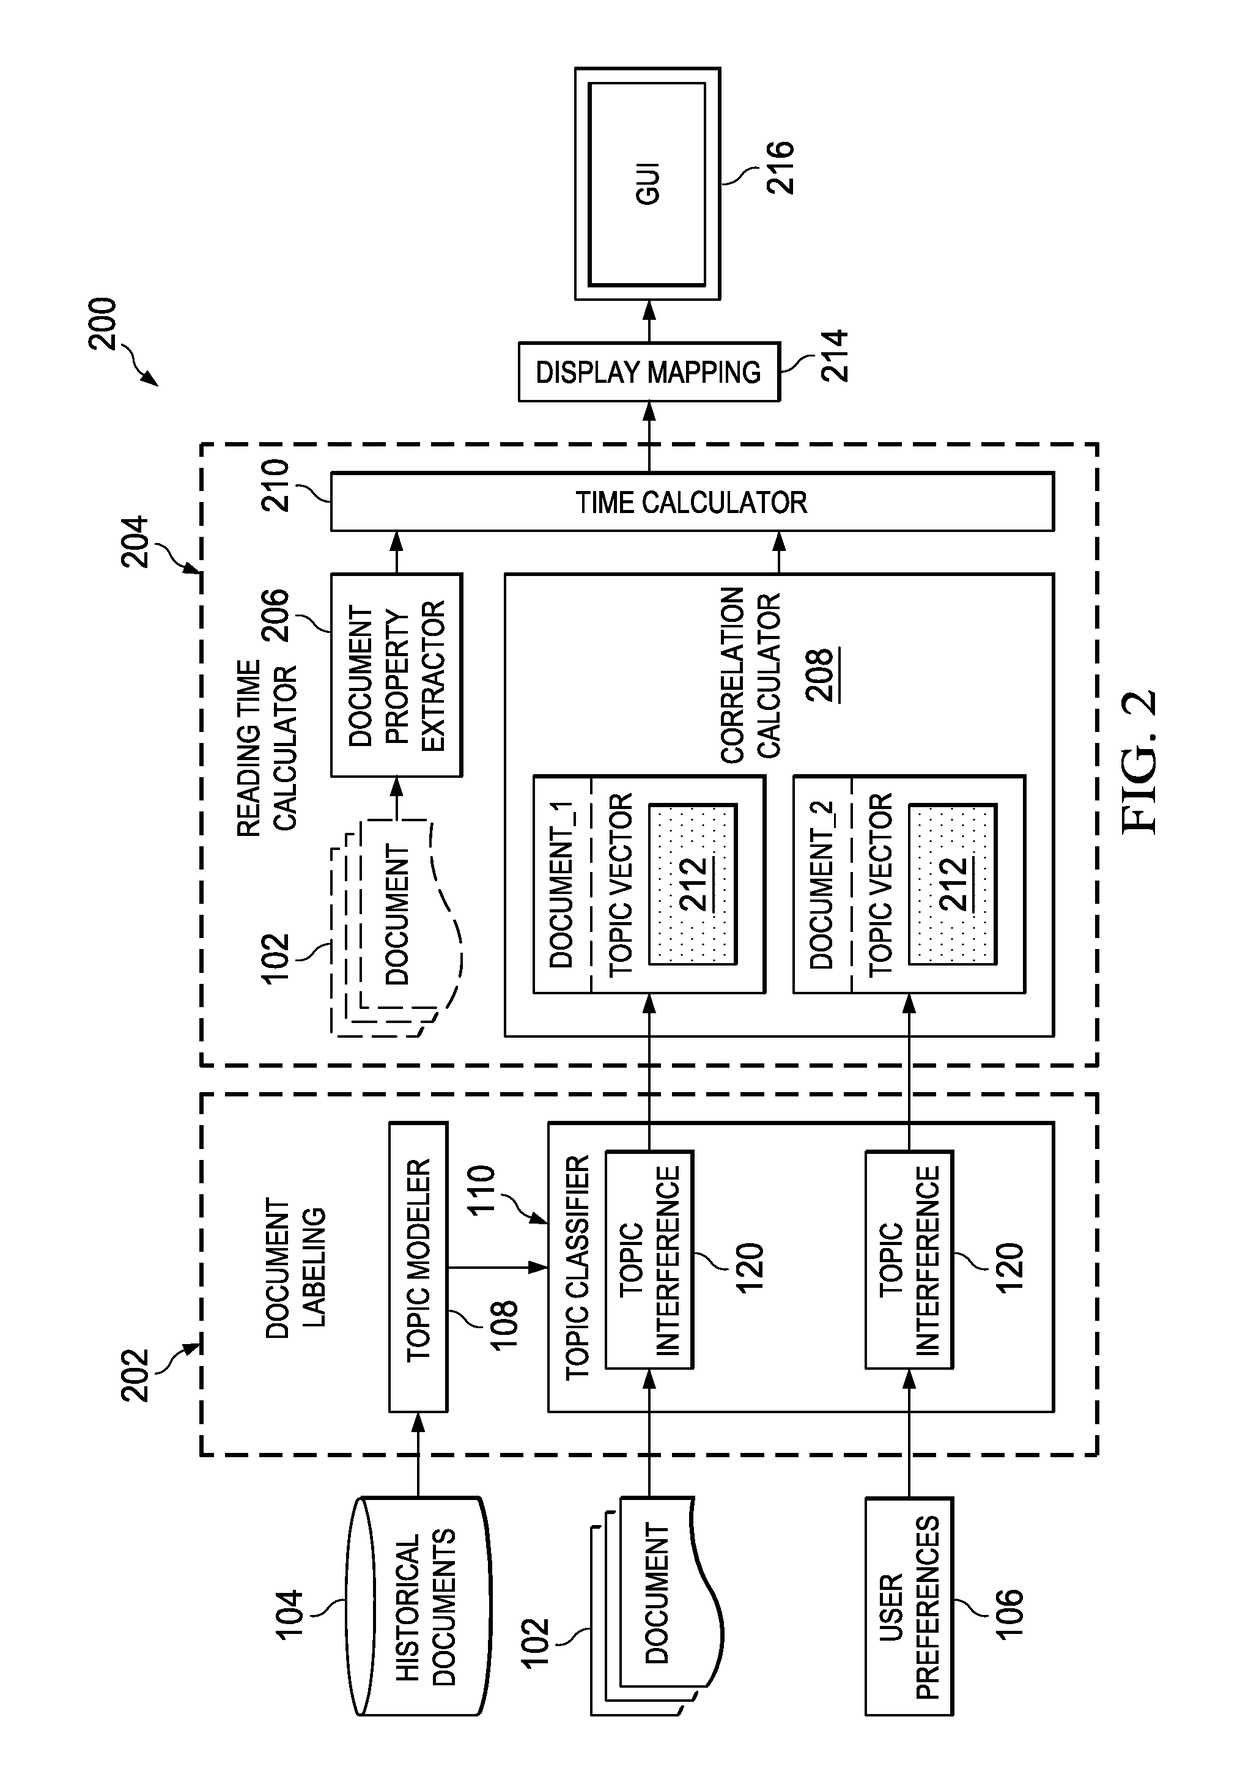 Managing a display of content based on user interaction topic and topic vectors